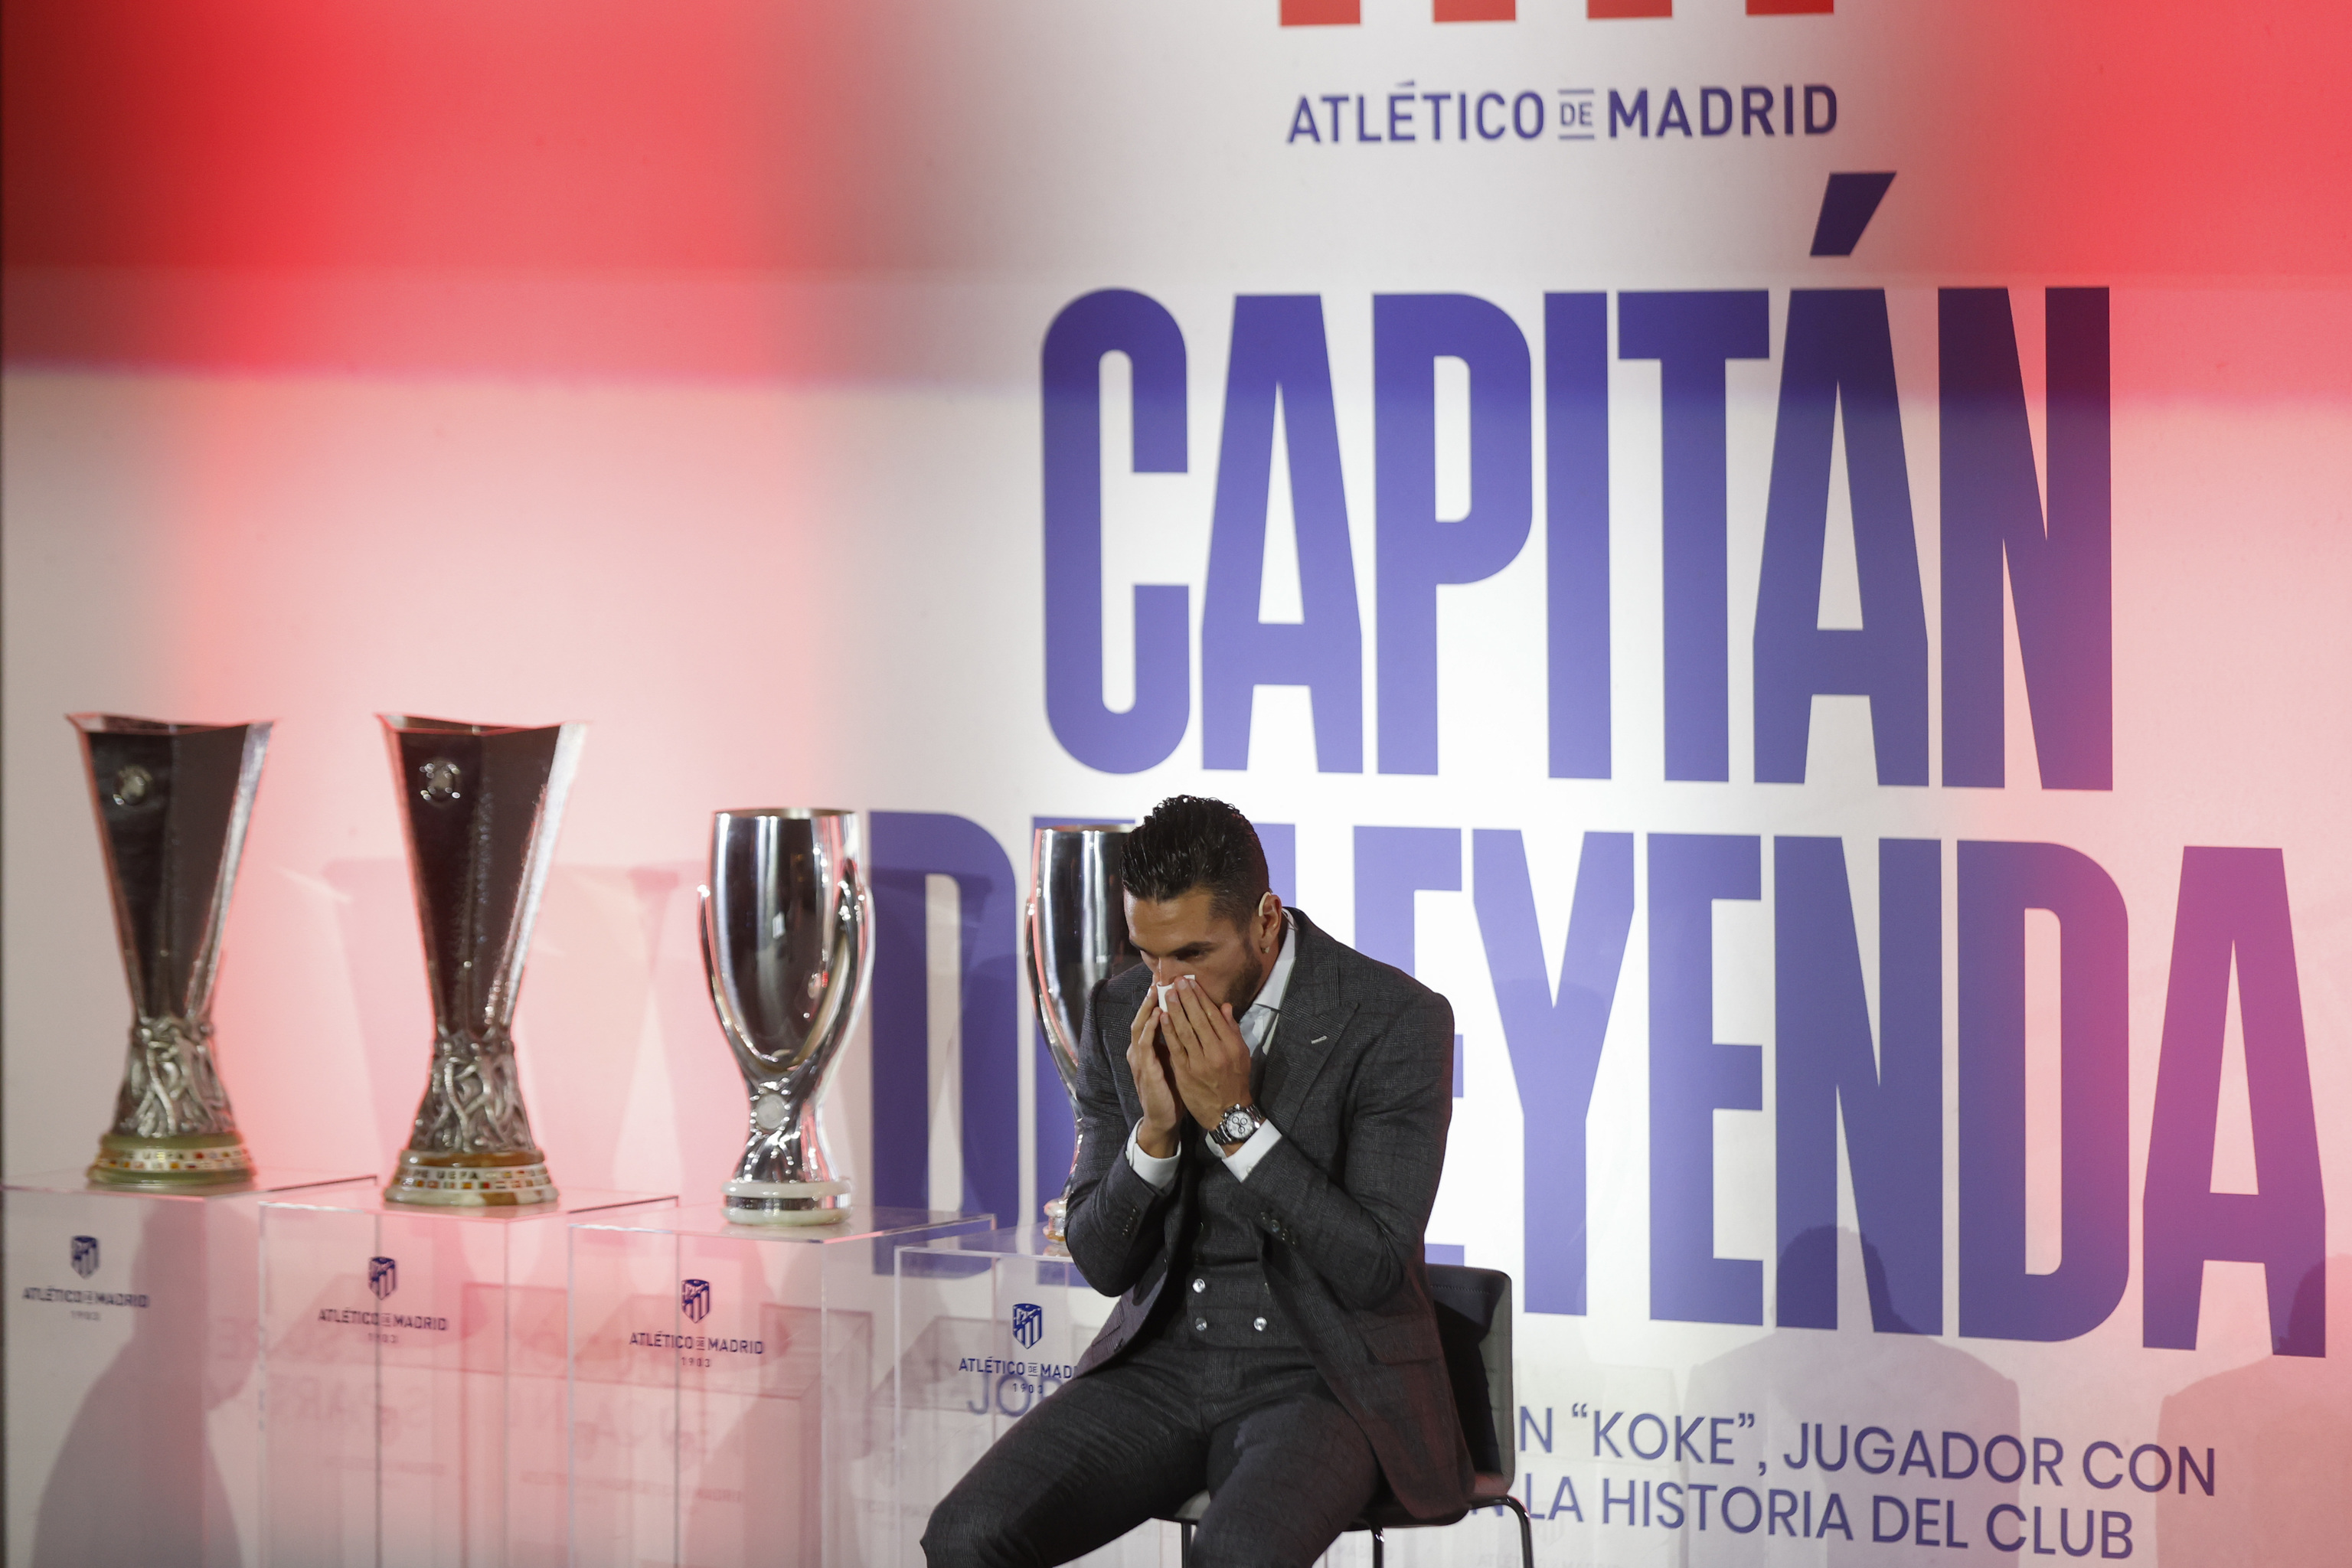 Koke, moved, during his tribute.